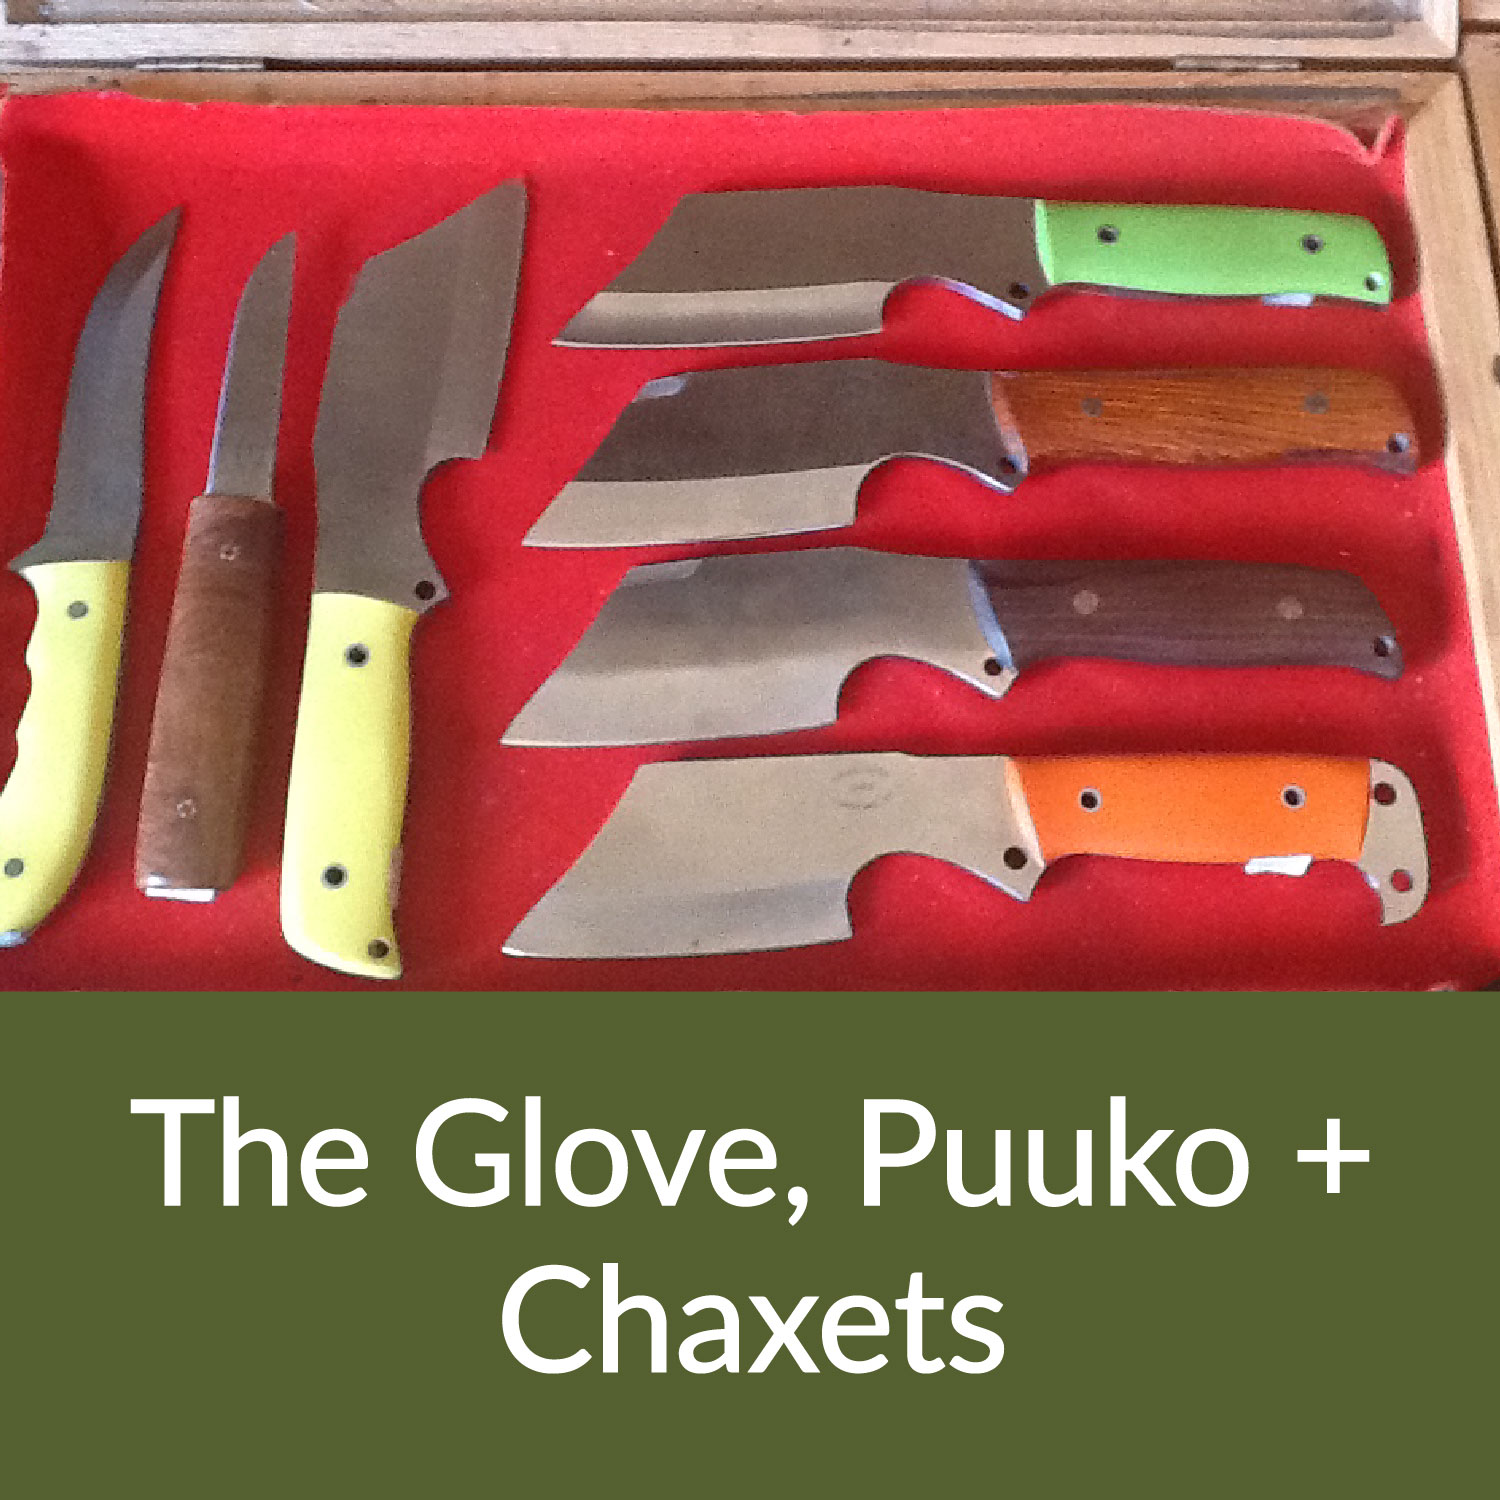 The Glove, The Puuko, and Chaxets